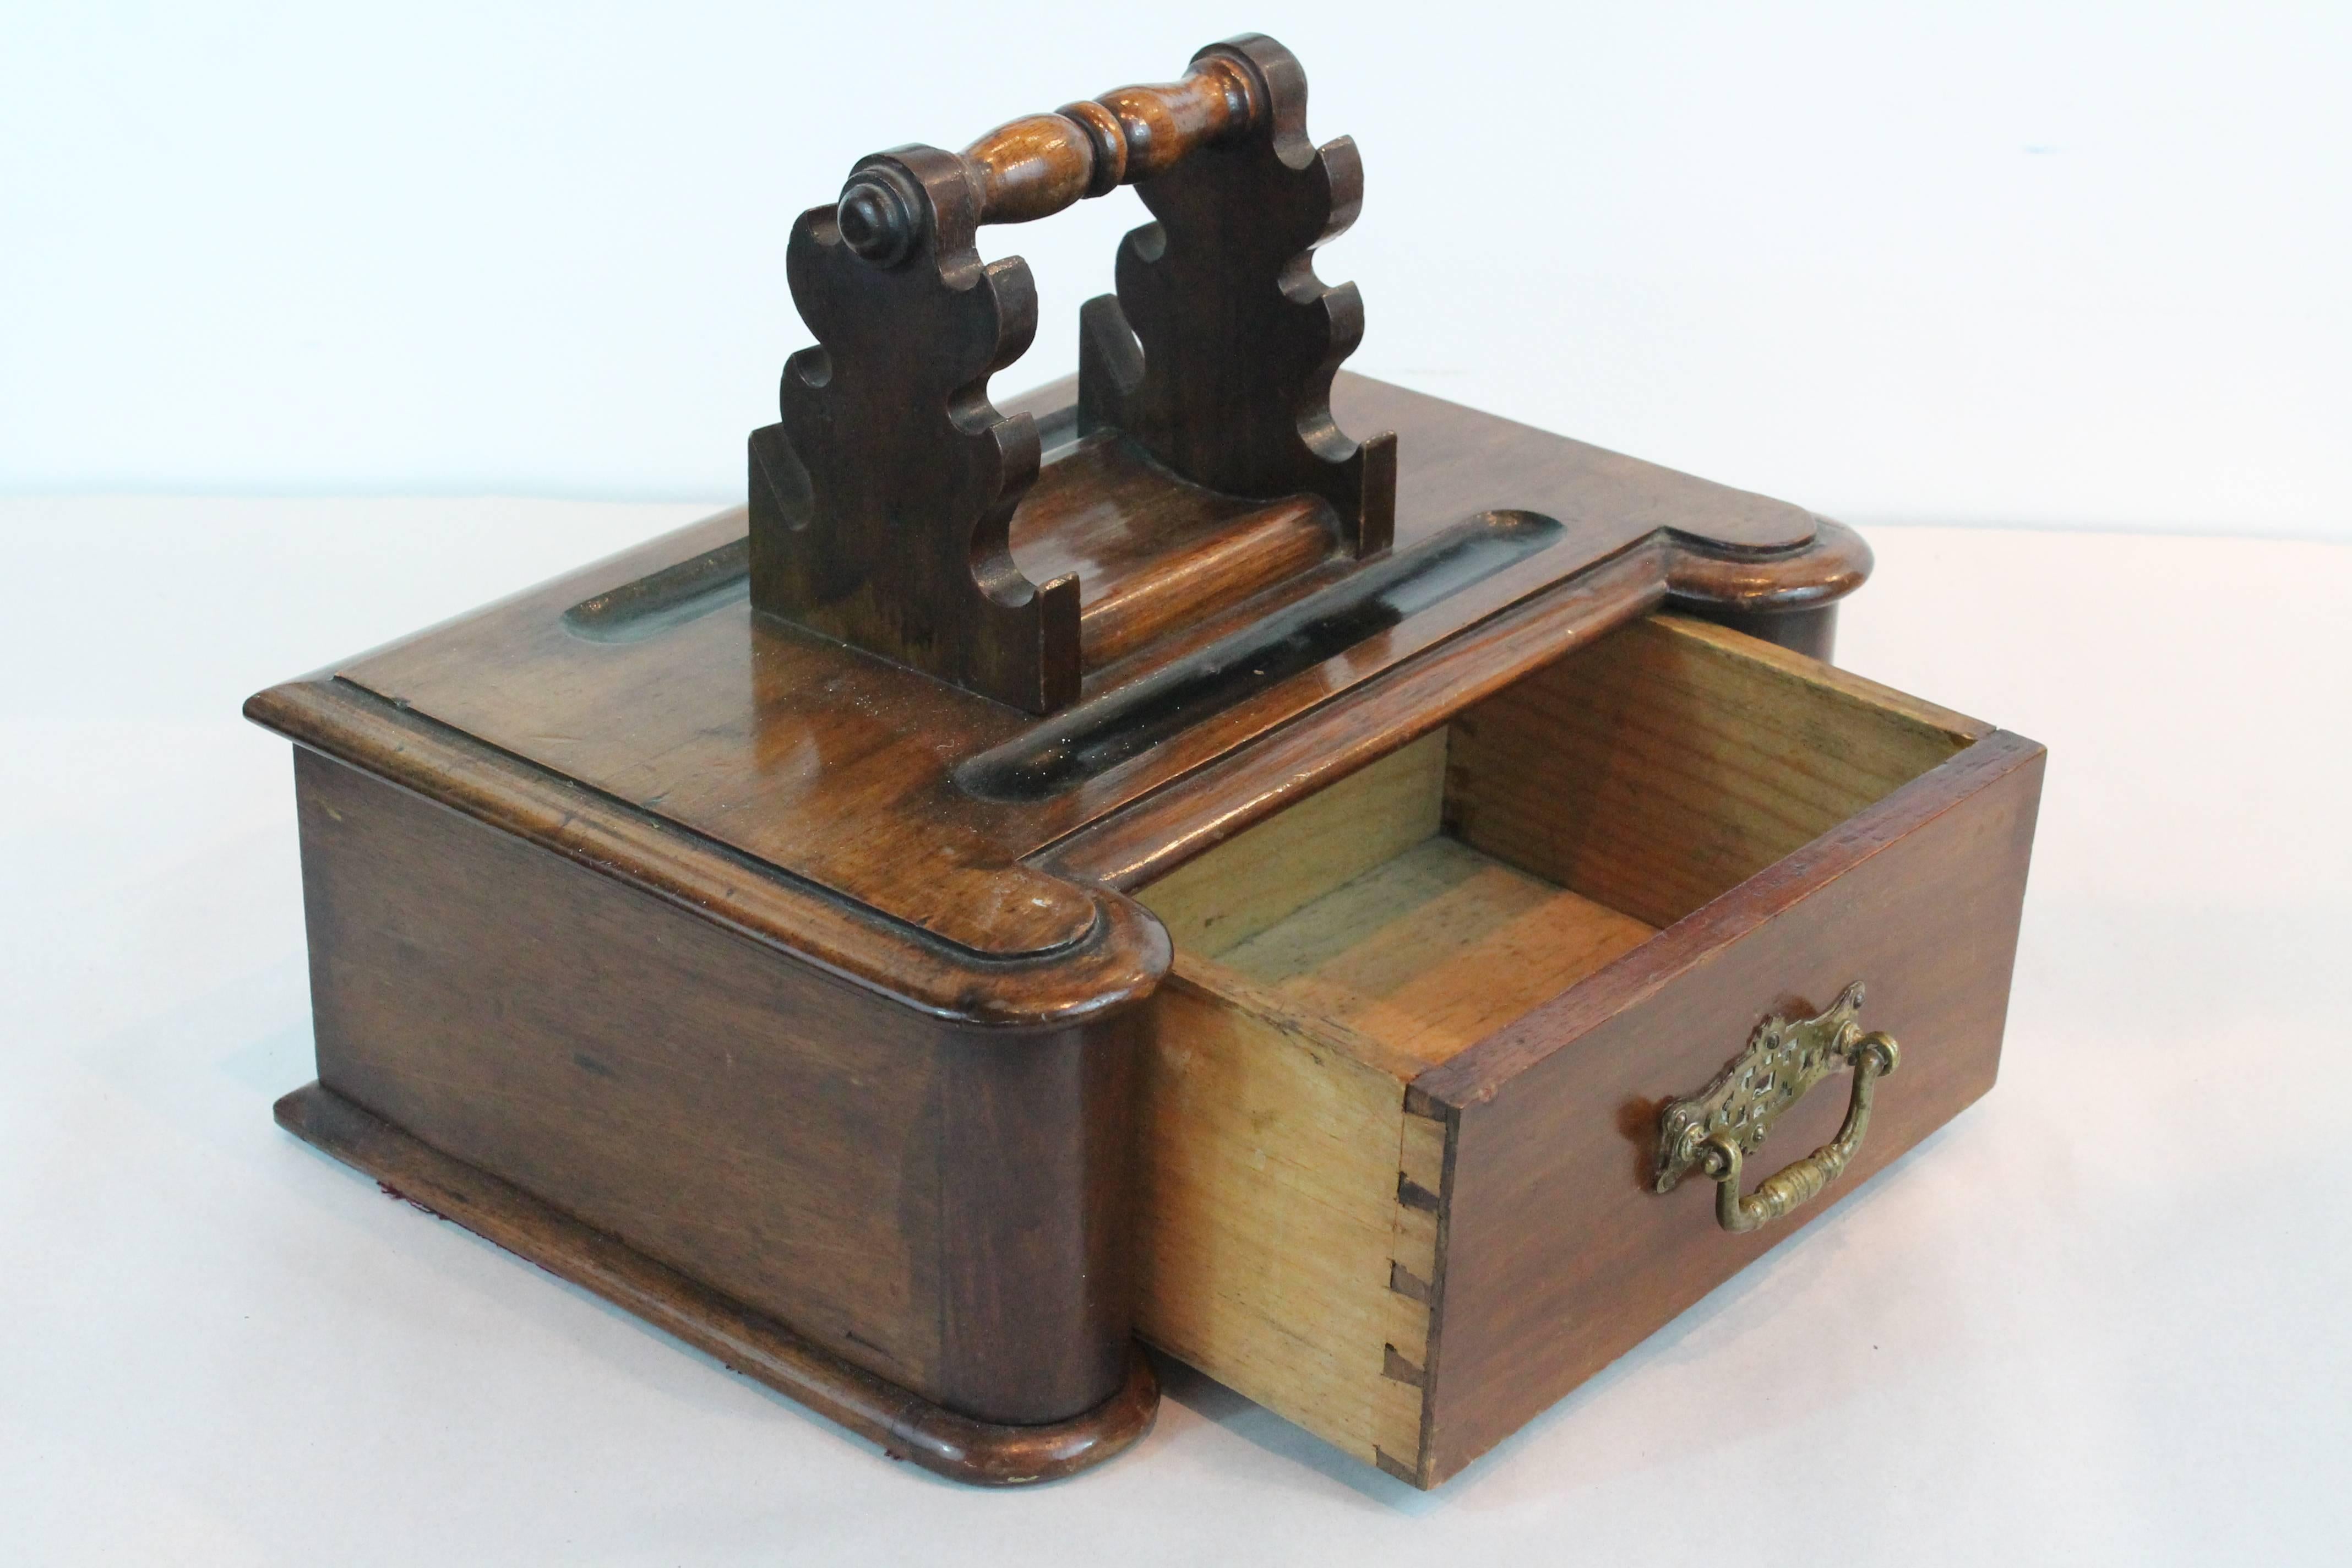 19th century carved walnut pen rest carrying stand.
Brass handled dovetailed drawer.

